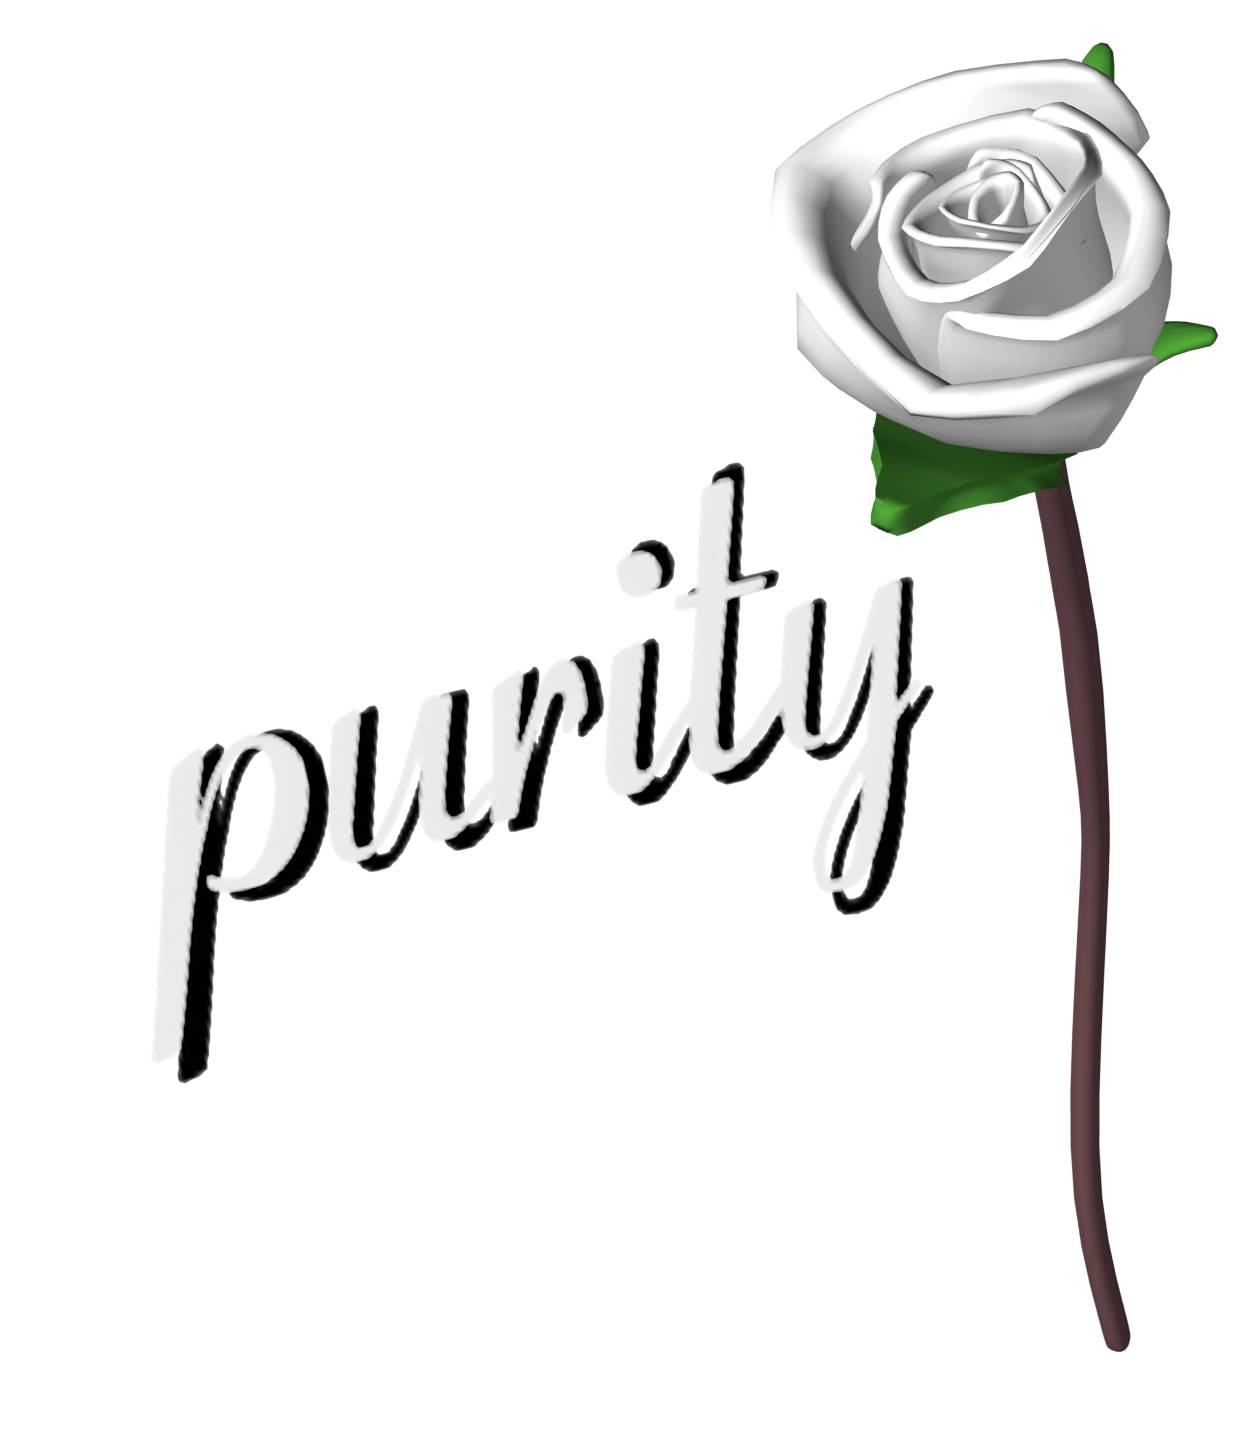 purity synonym